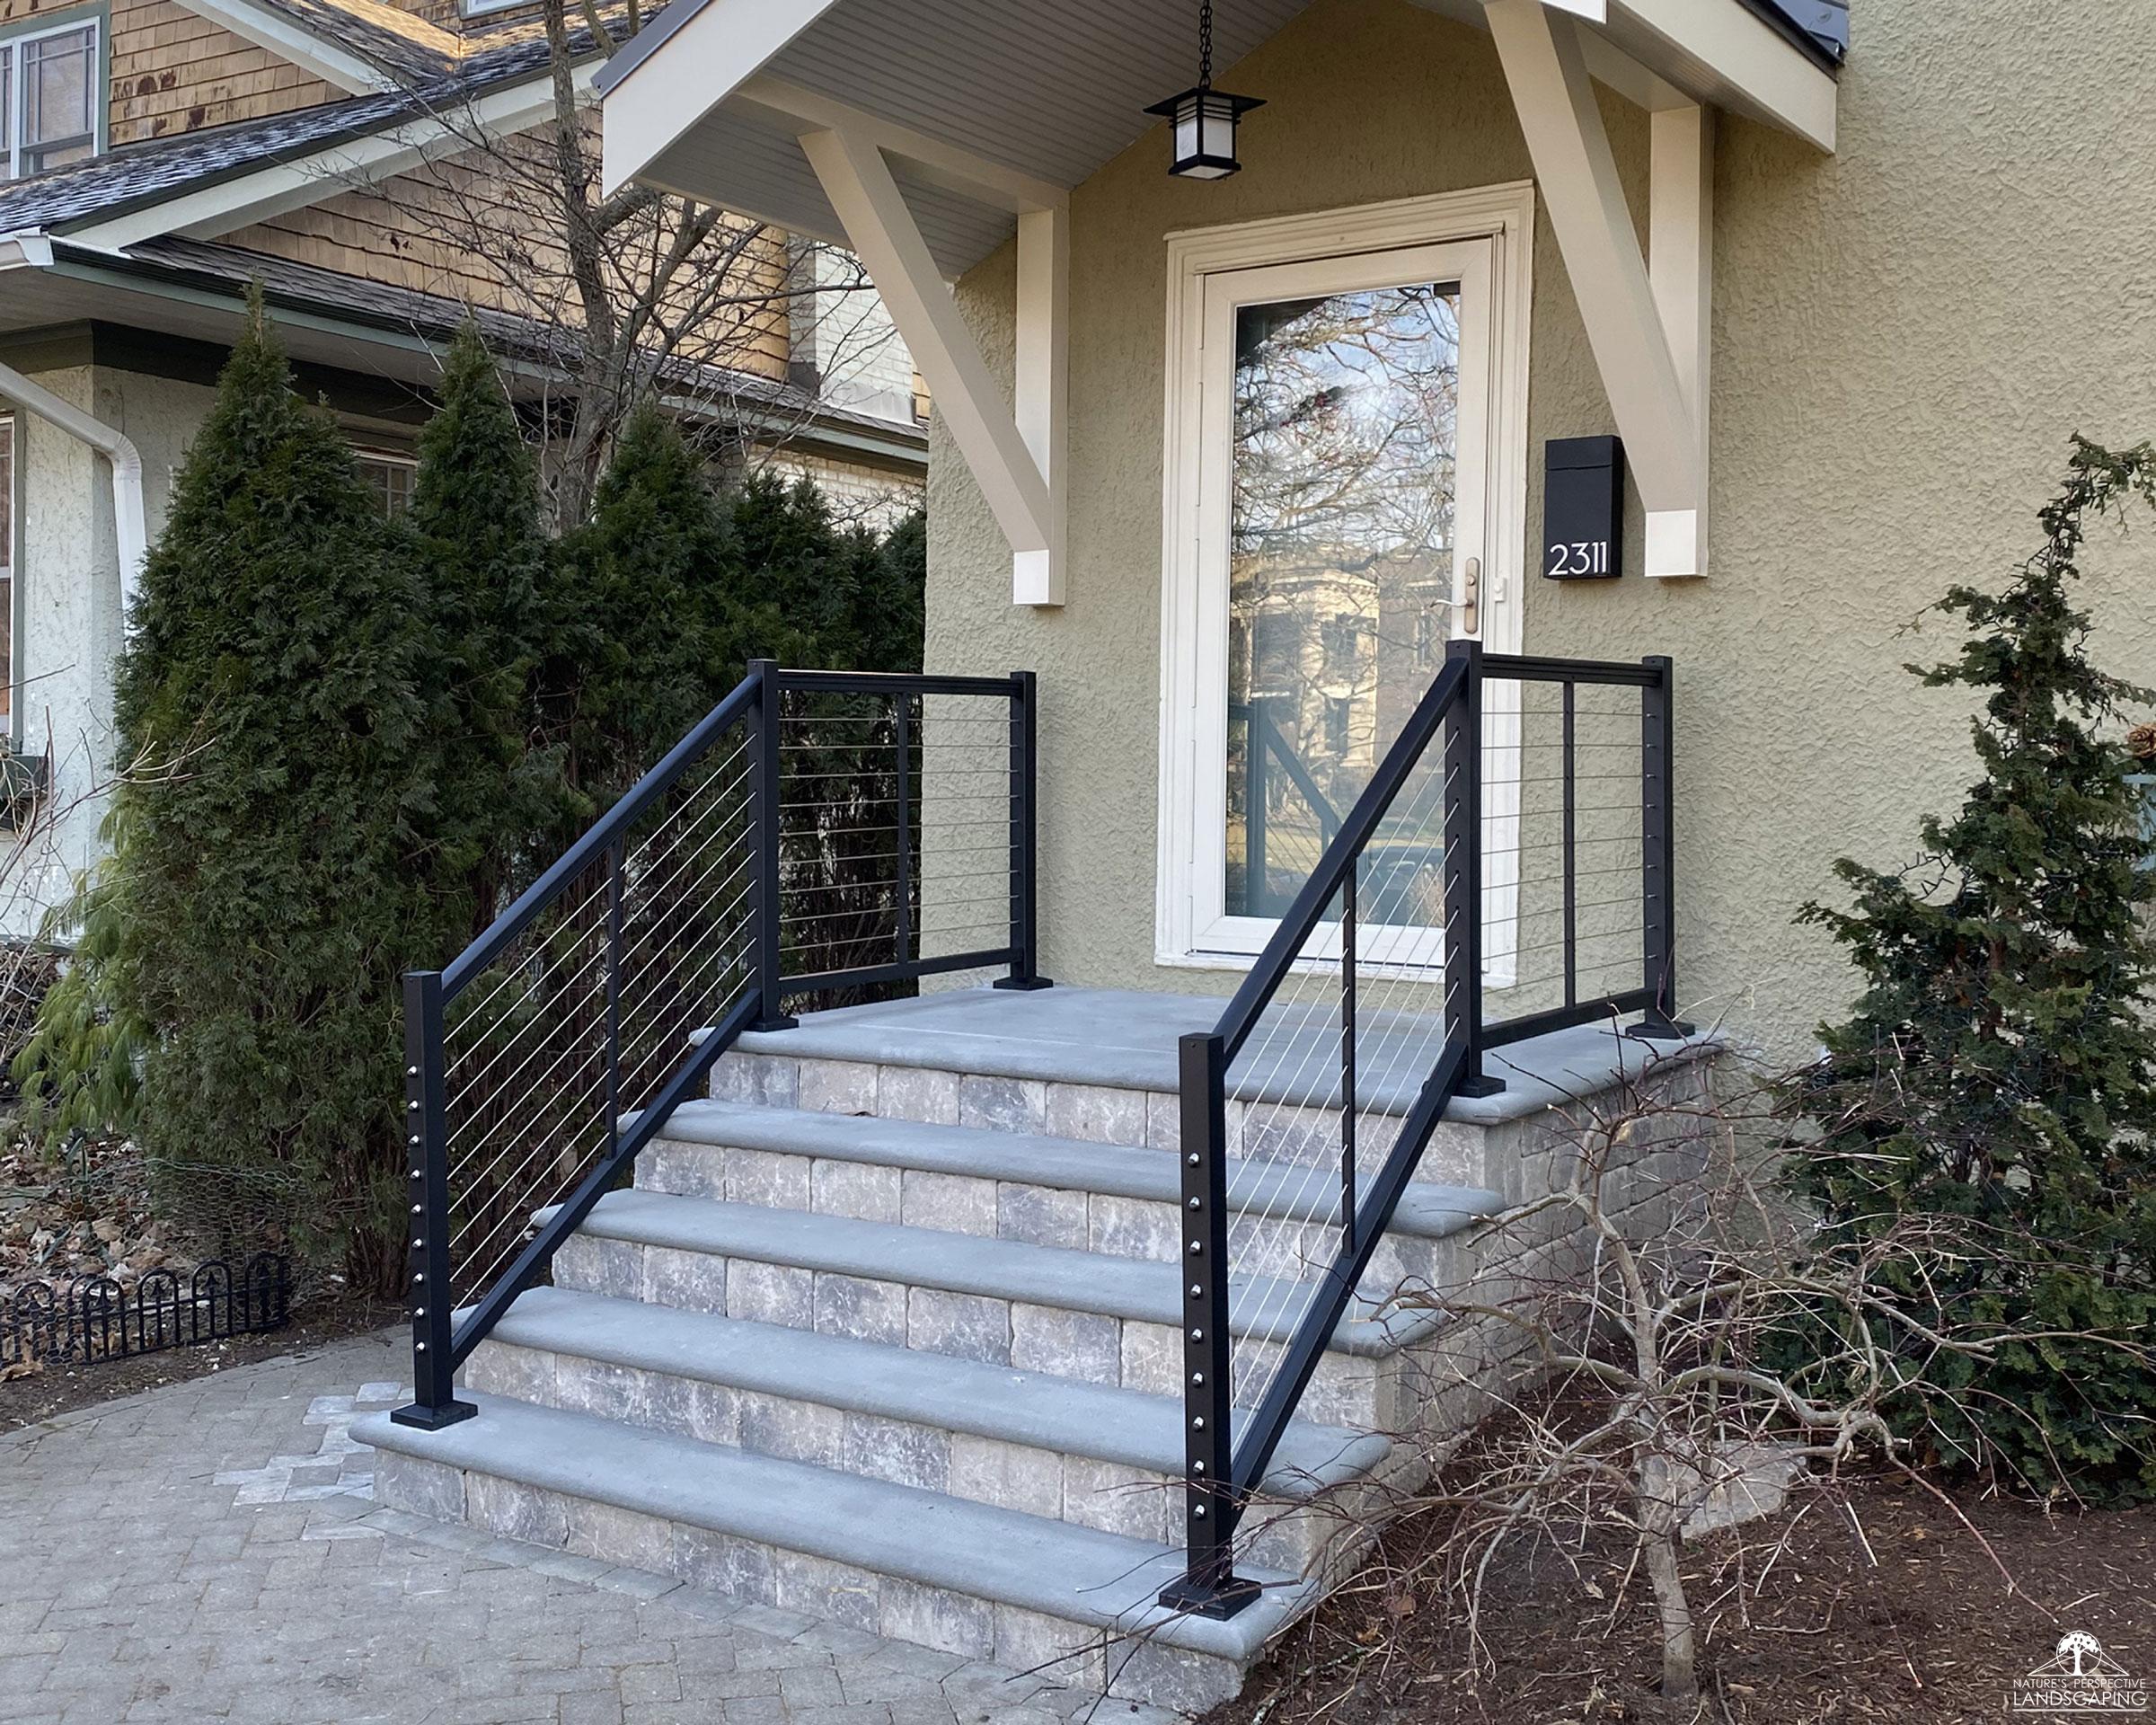 new modular front stoop with contemporary metal railings